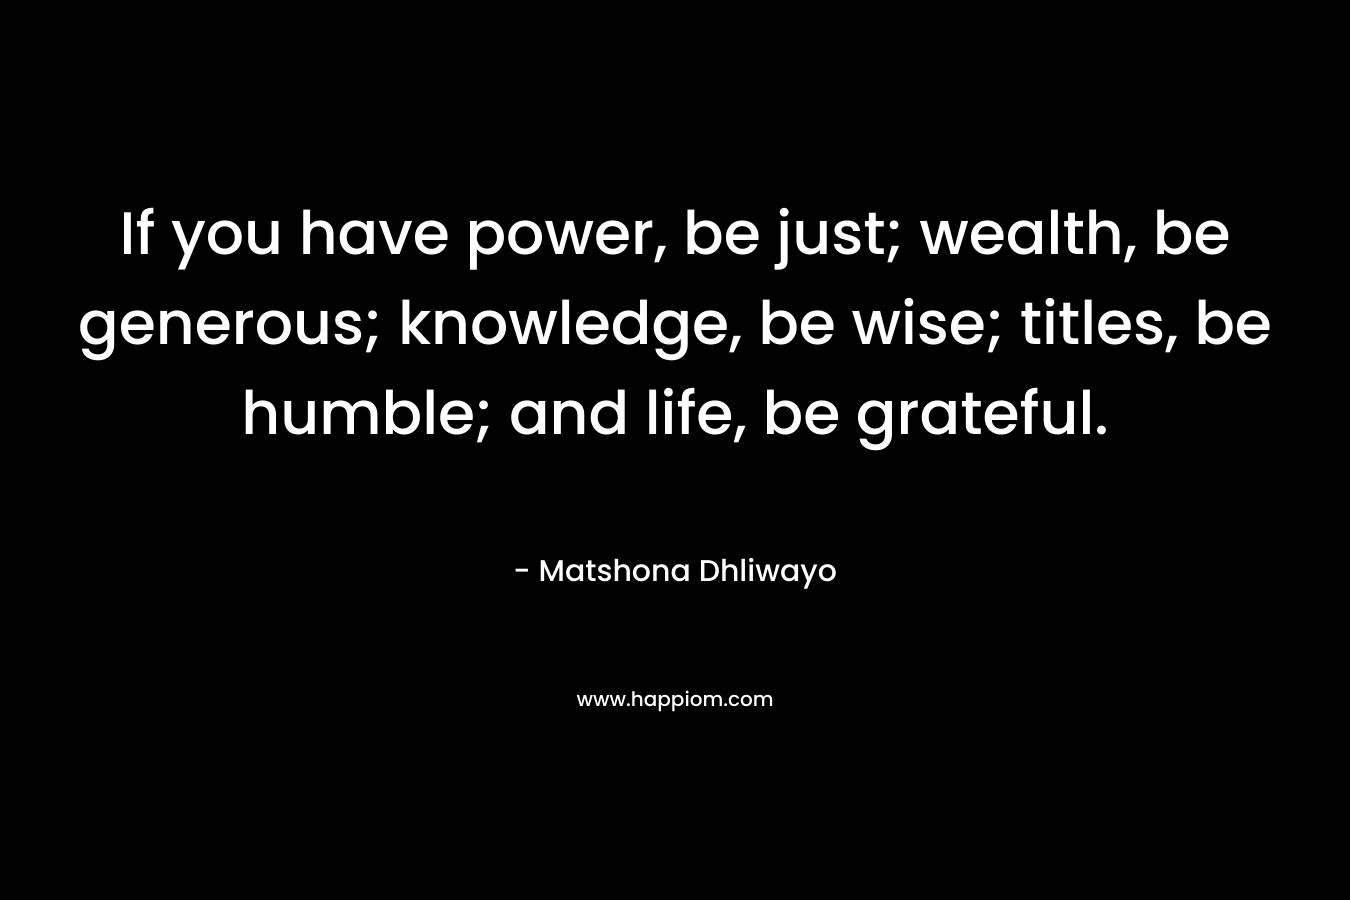 If you have power, be just; wealth, be generous; knowledge, be wise; titles, be humble; and life, be grateful.